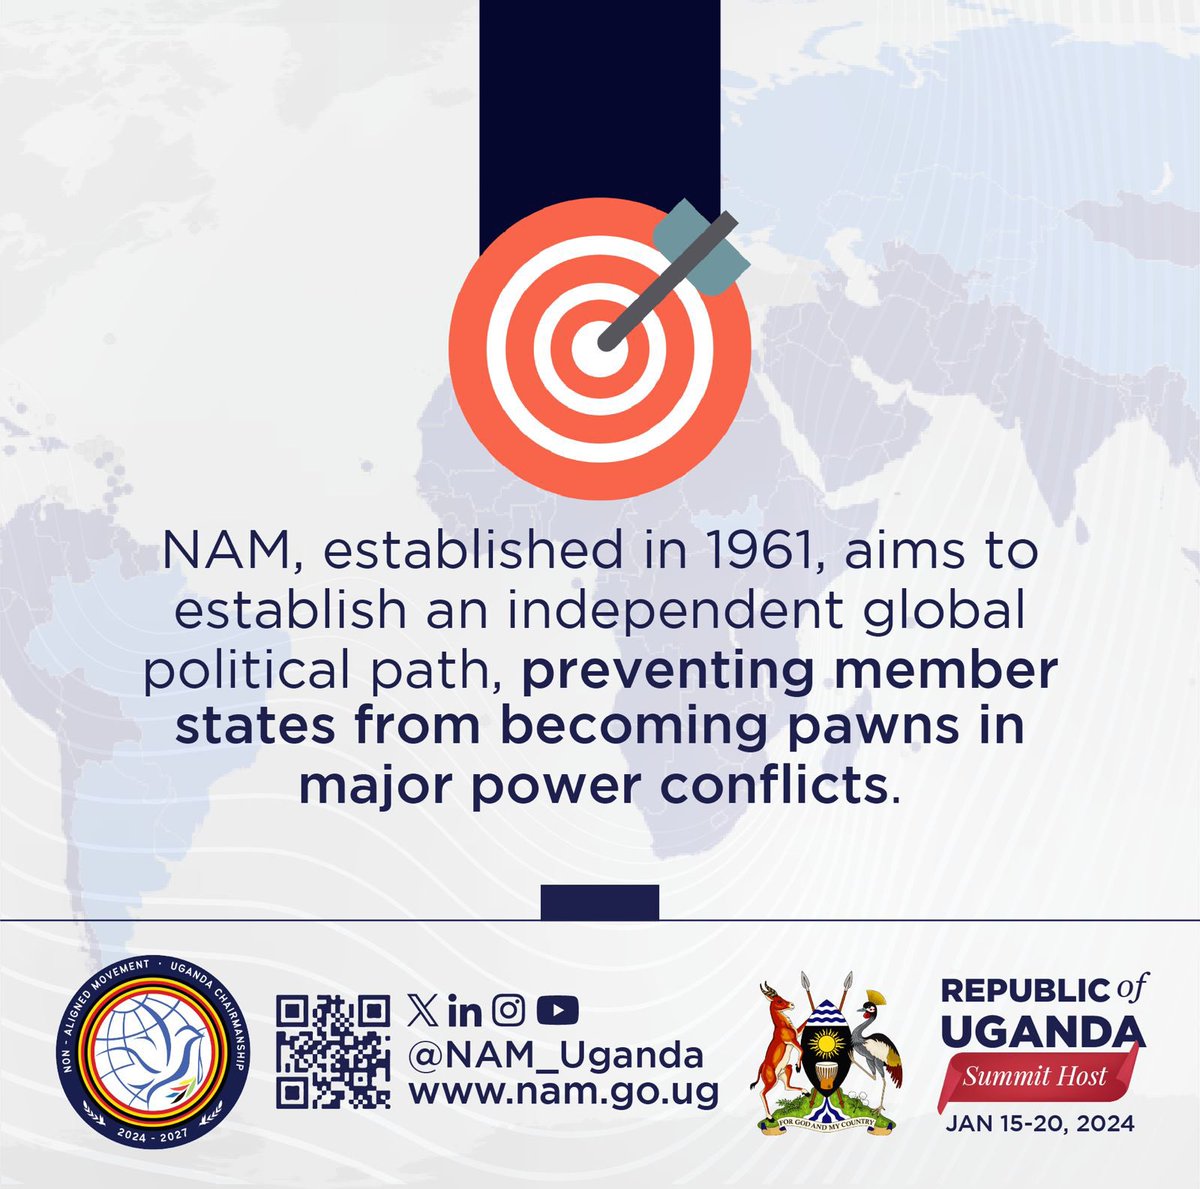 The Non-Aligned Movement aims to establish an independent global political path, preventing member states from becoming pawns in major power conflicts. #NAMSummitUg2024 | #UBCUpdates